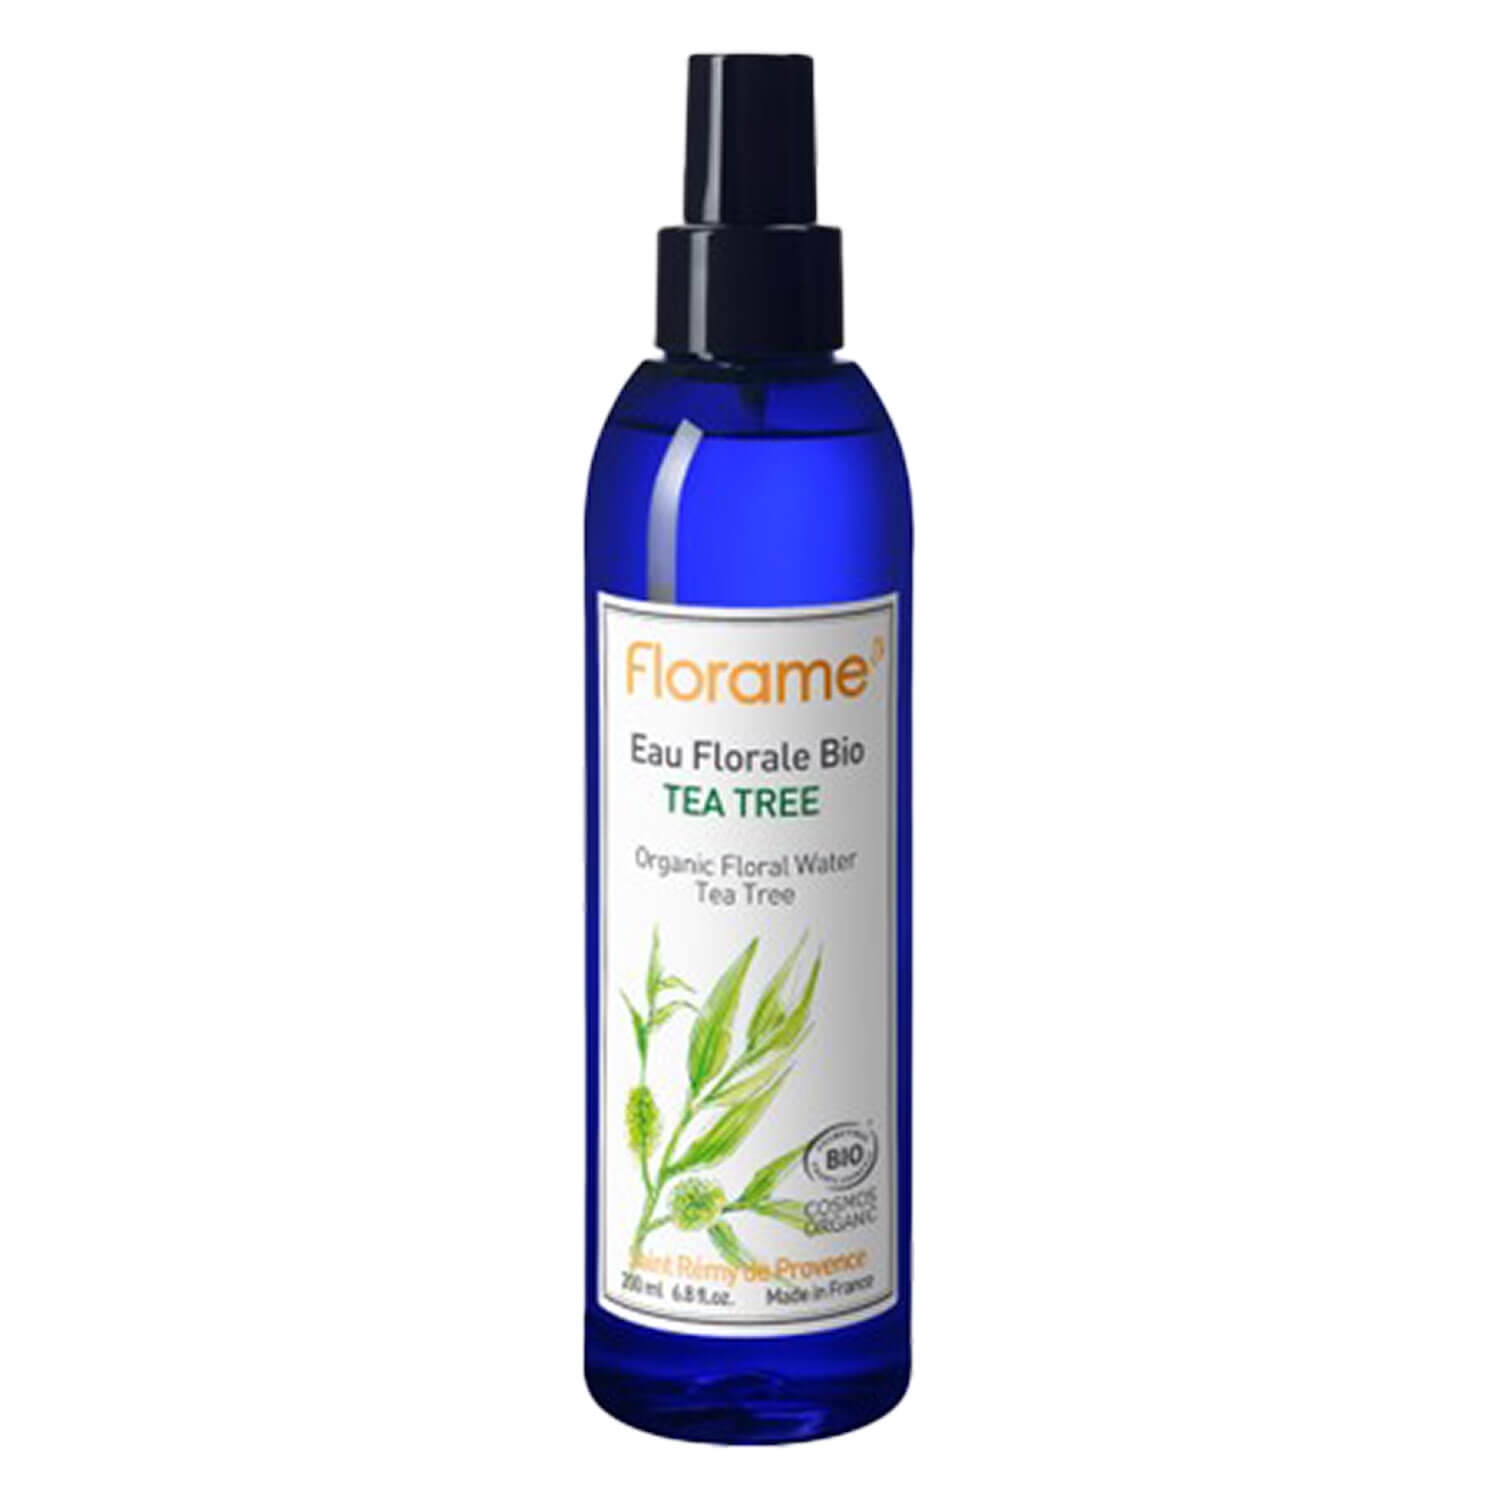 Product image from Florame - Organic Floral Water Tea Tree